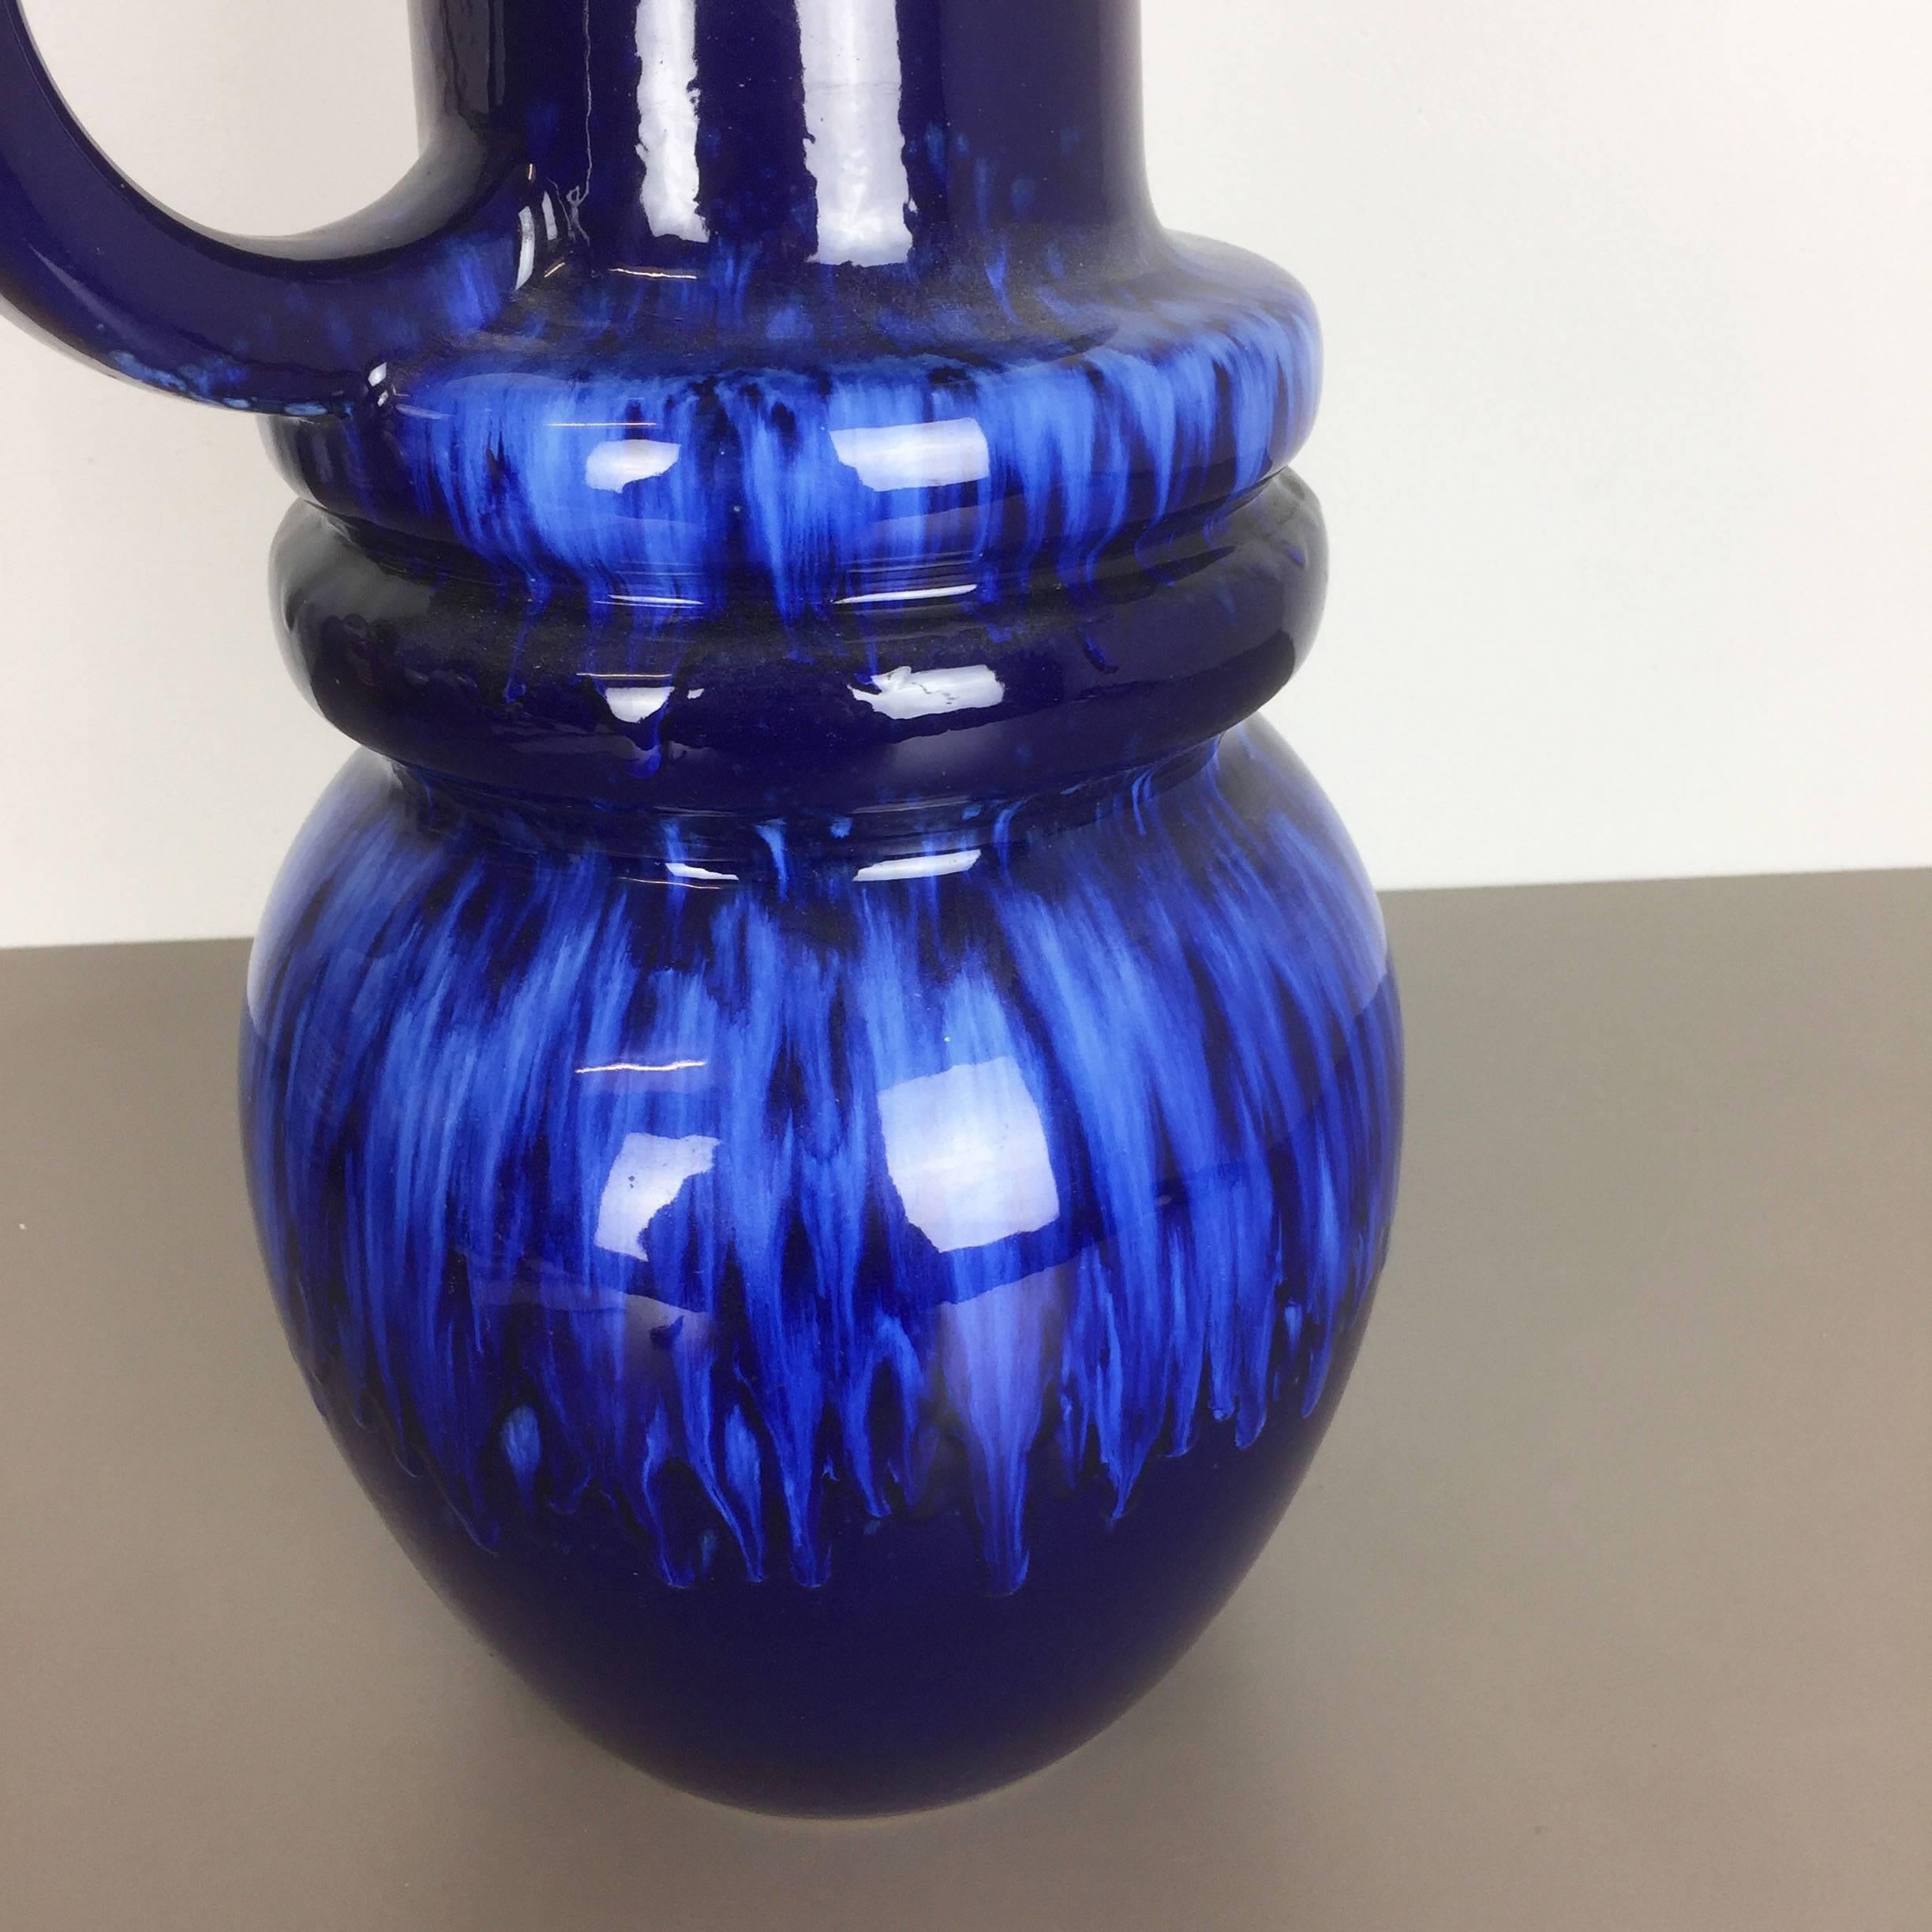 Extra Large Vintage Vienna Fat Lava Vase Made by Scheurich, Germany, 1970s (Keramik)